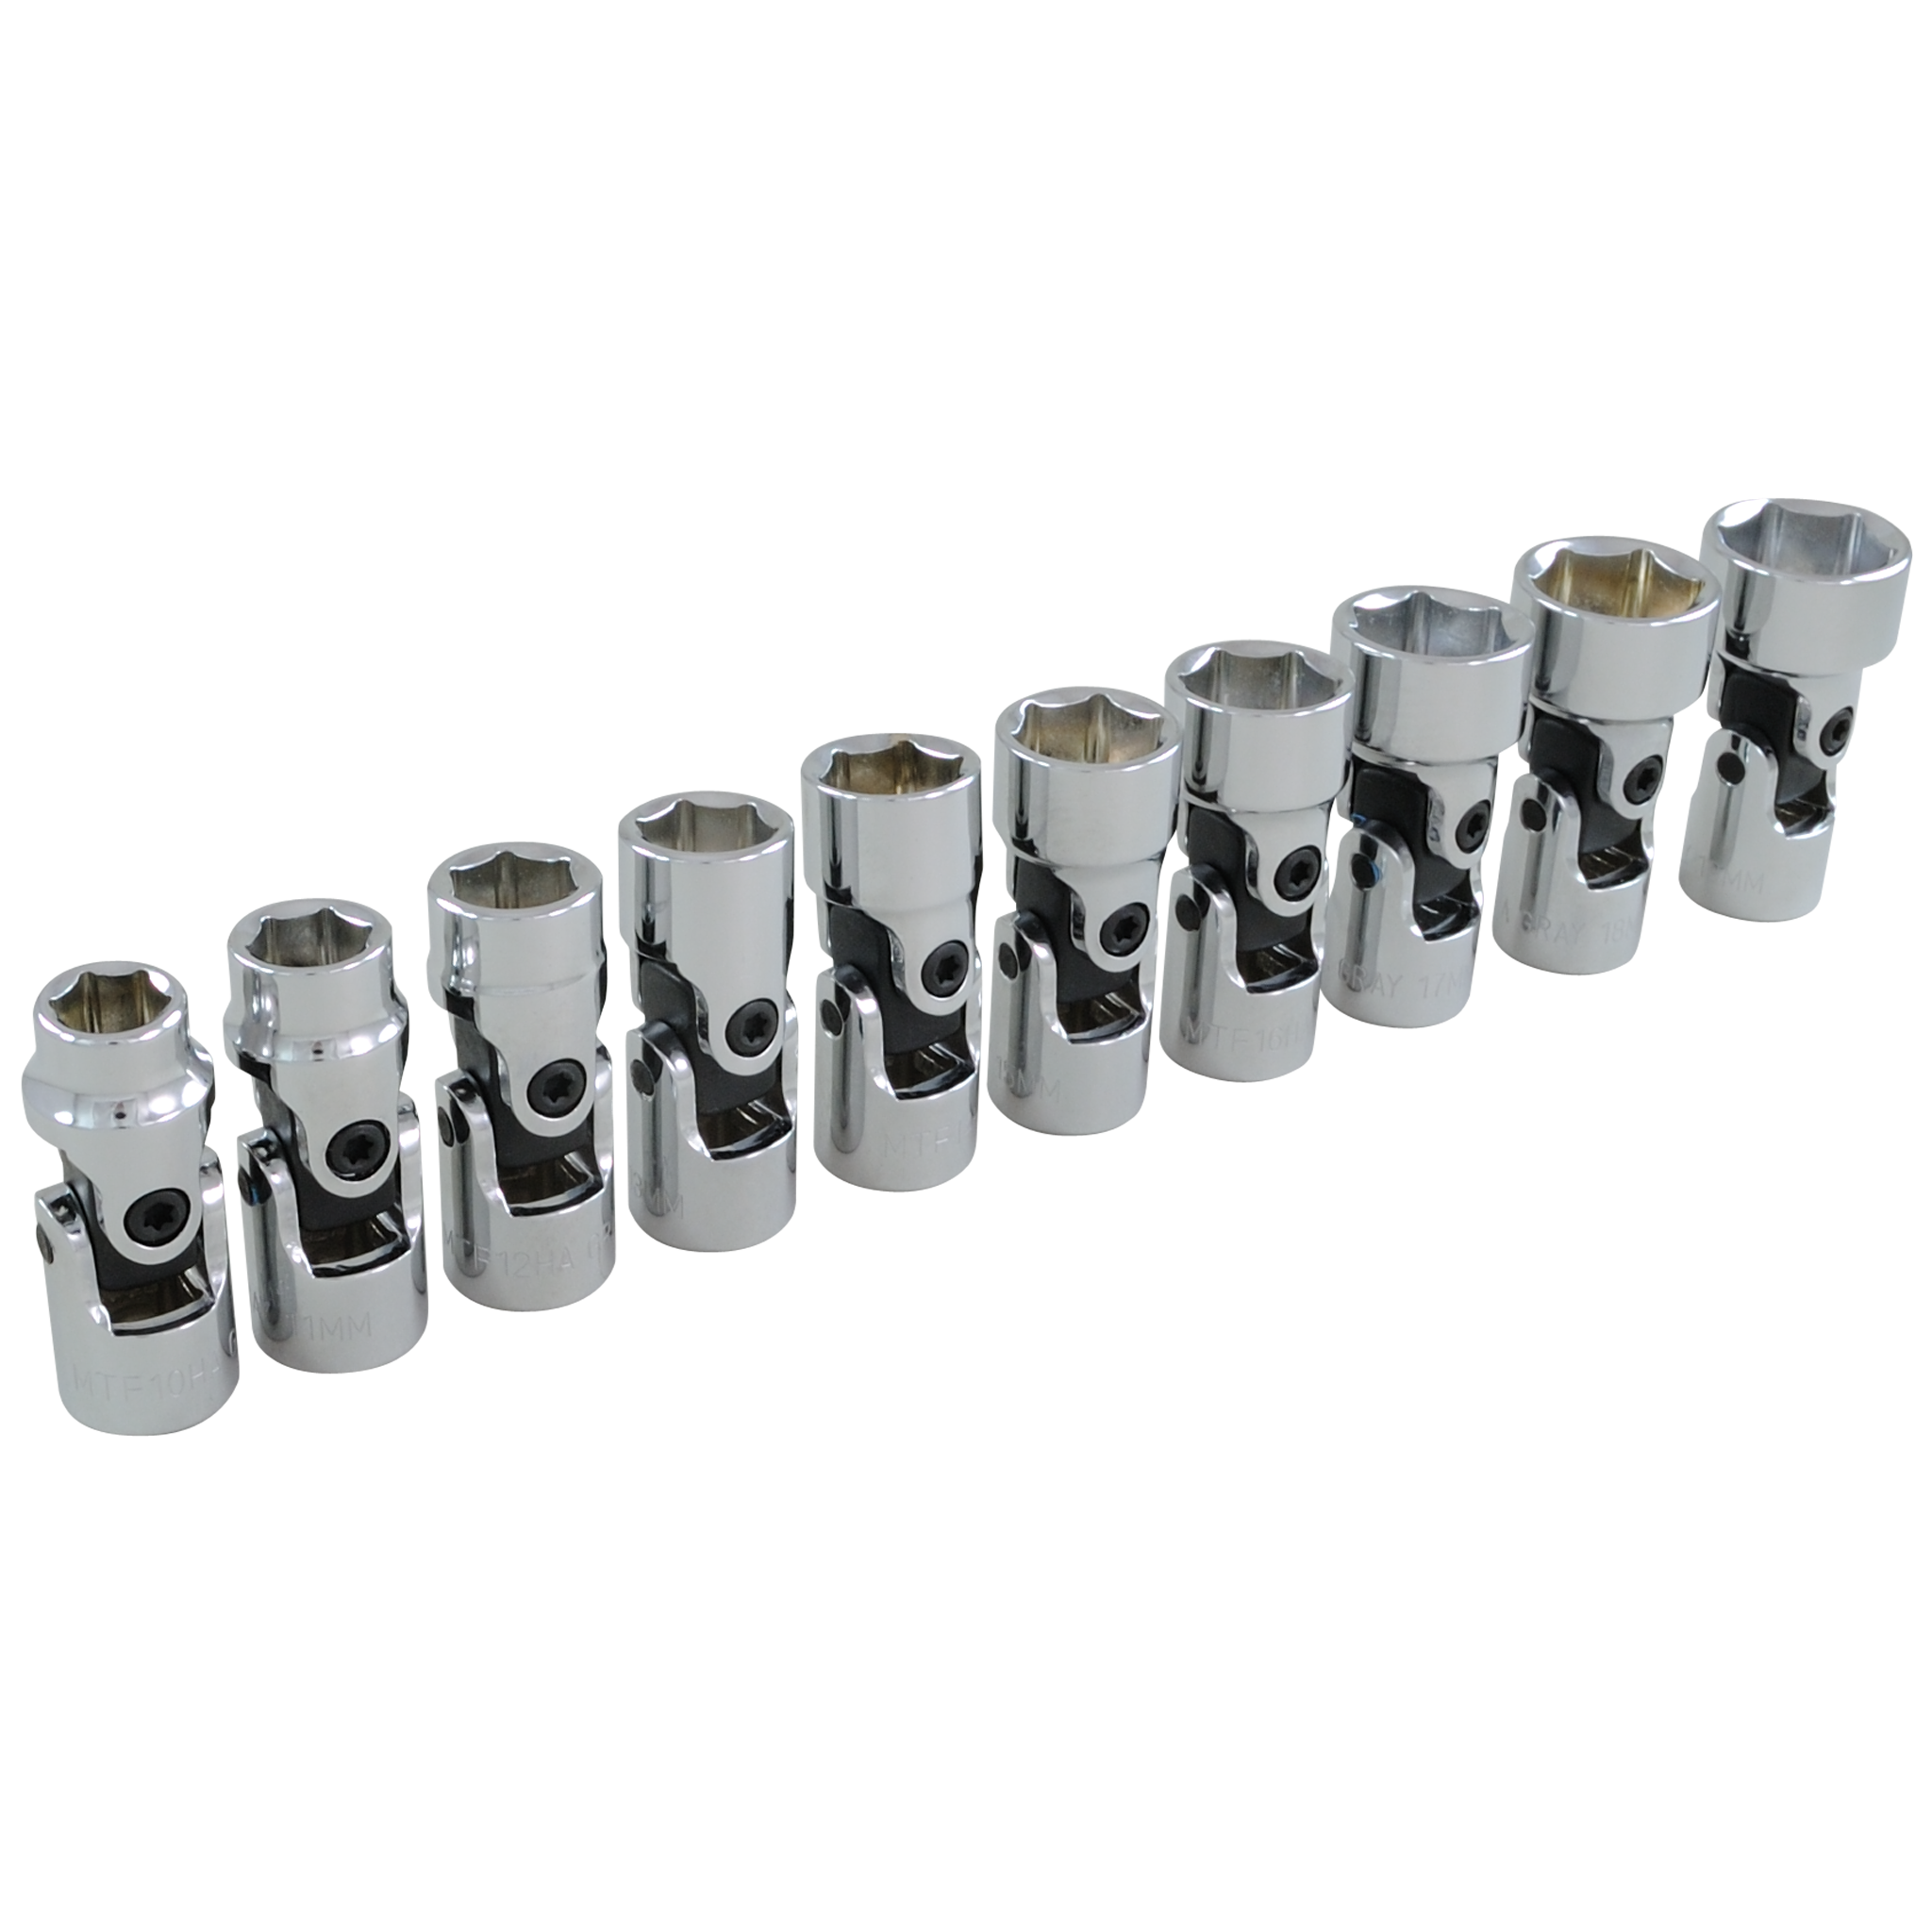 3/8" Dr. 10 Piece 6 Point Metric Universal Joint Socket Set